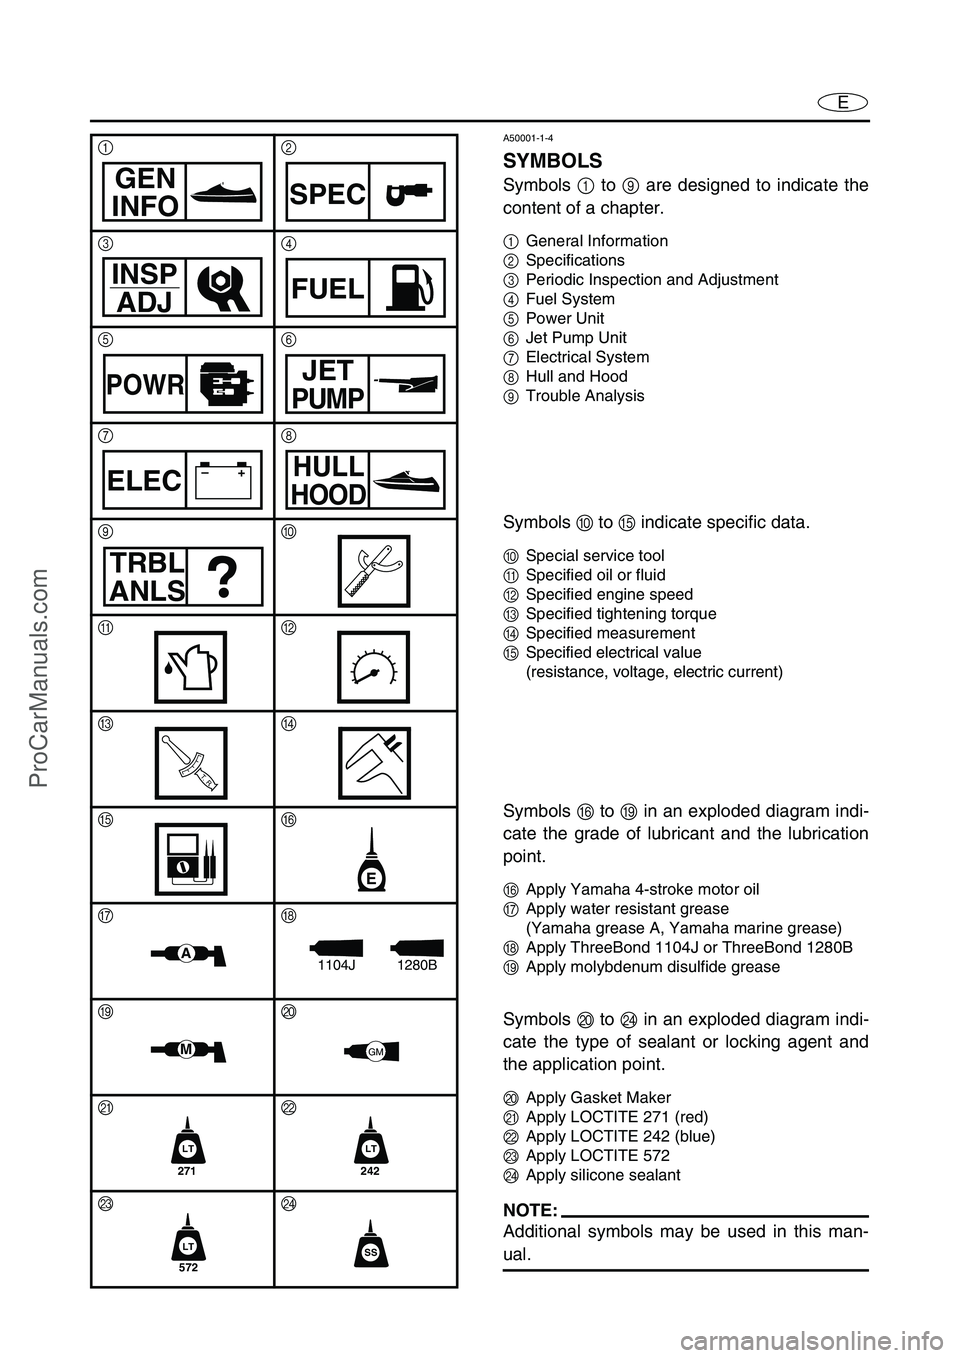 YAMAHA VX110 2005  Service Manual E
A50001-1-4
SYMBOLS
Symbols 1 to 9 are designed to indicate the
content of a chapter.
1General Information
2Specifications
3Periodic Inspection and Adjustment
4Fuel System 
5Power Unit
6Jet Pump Unit